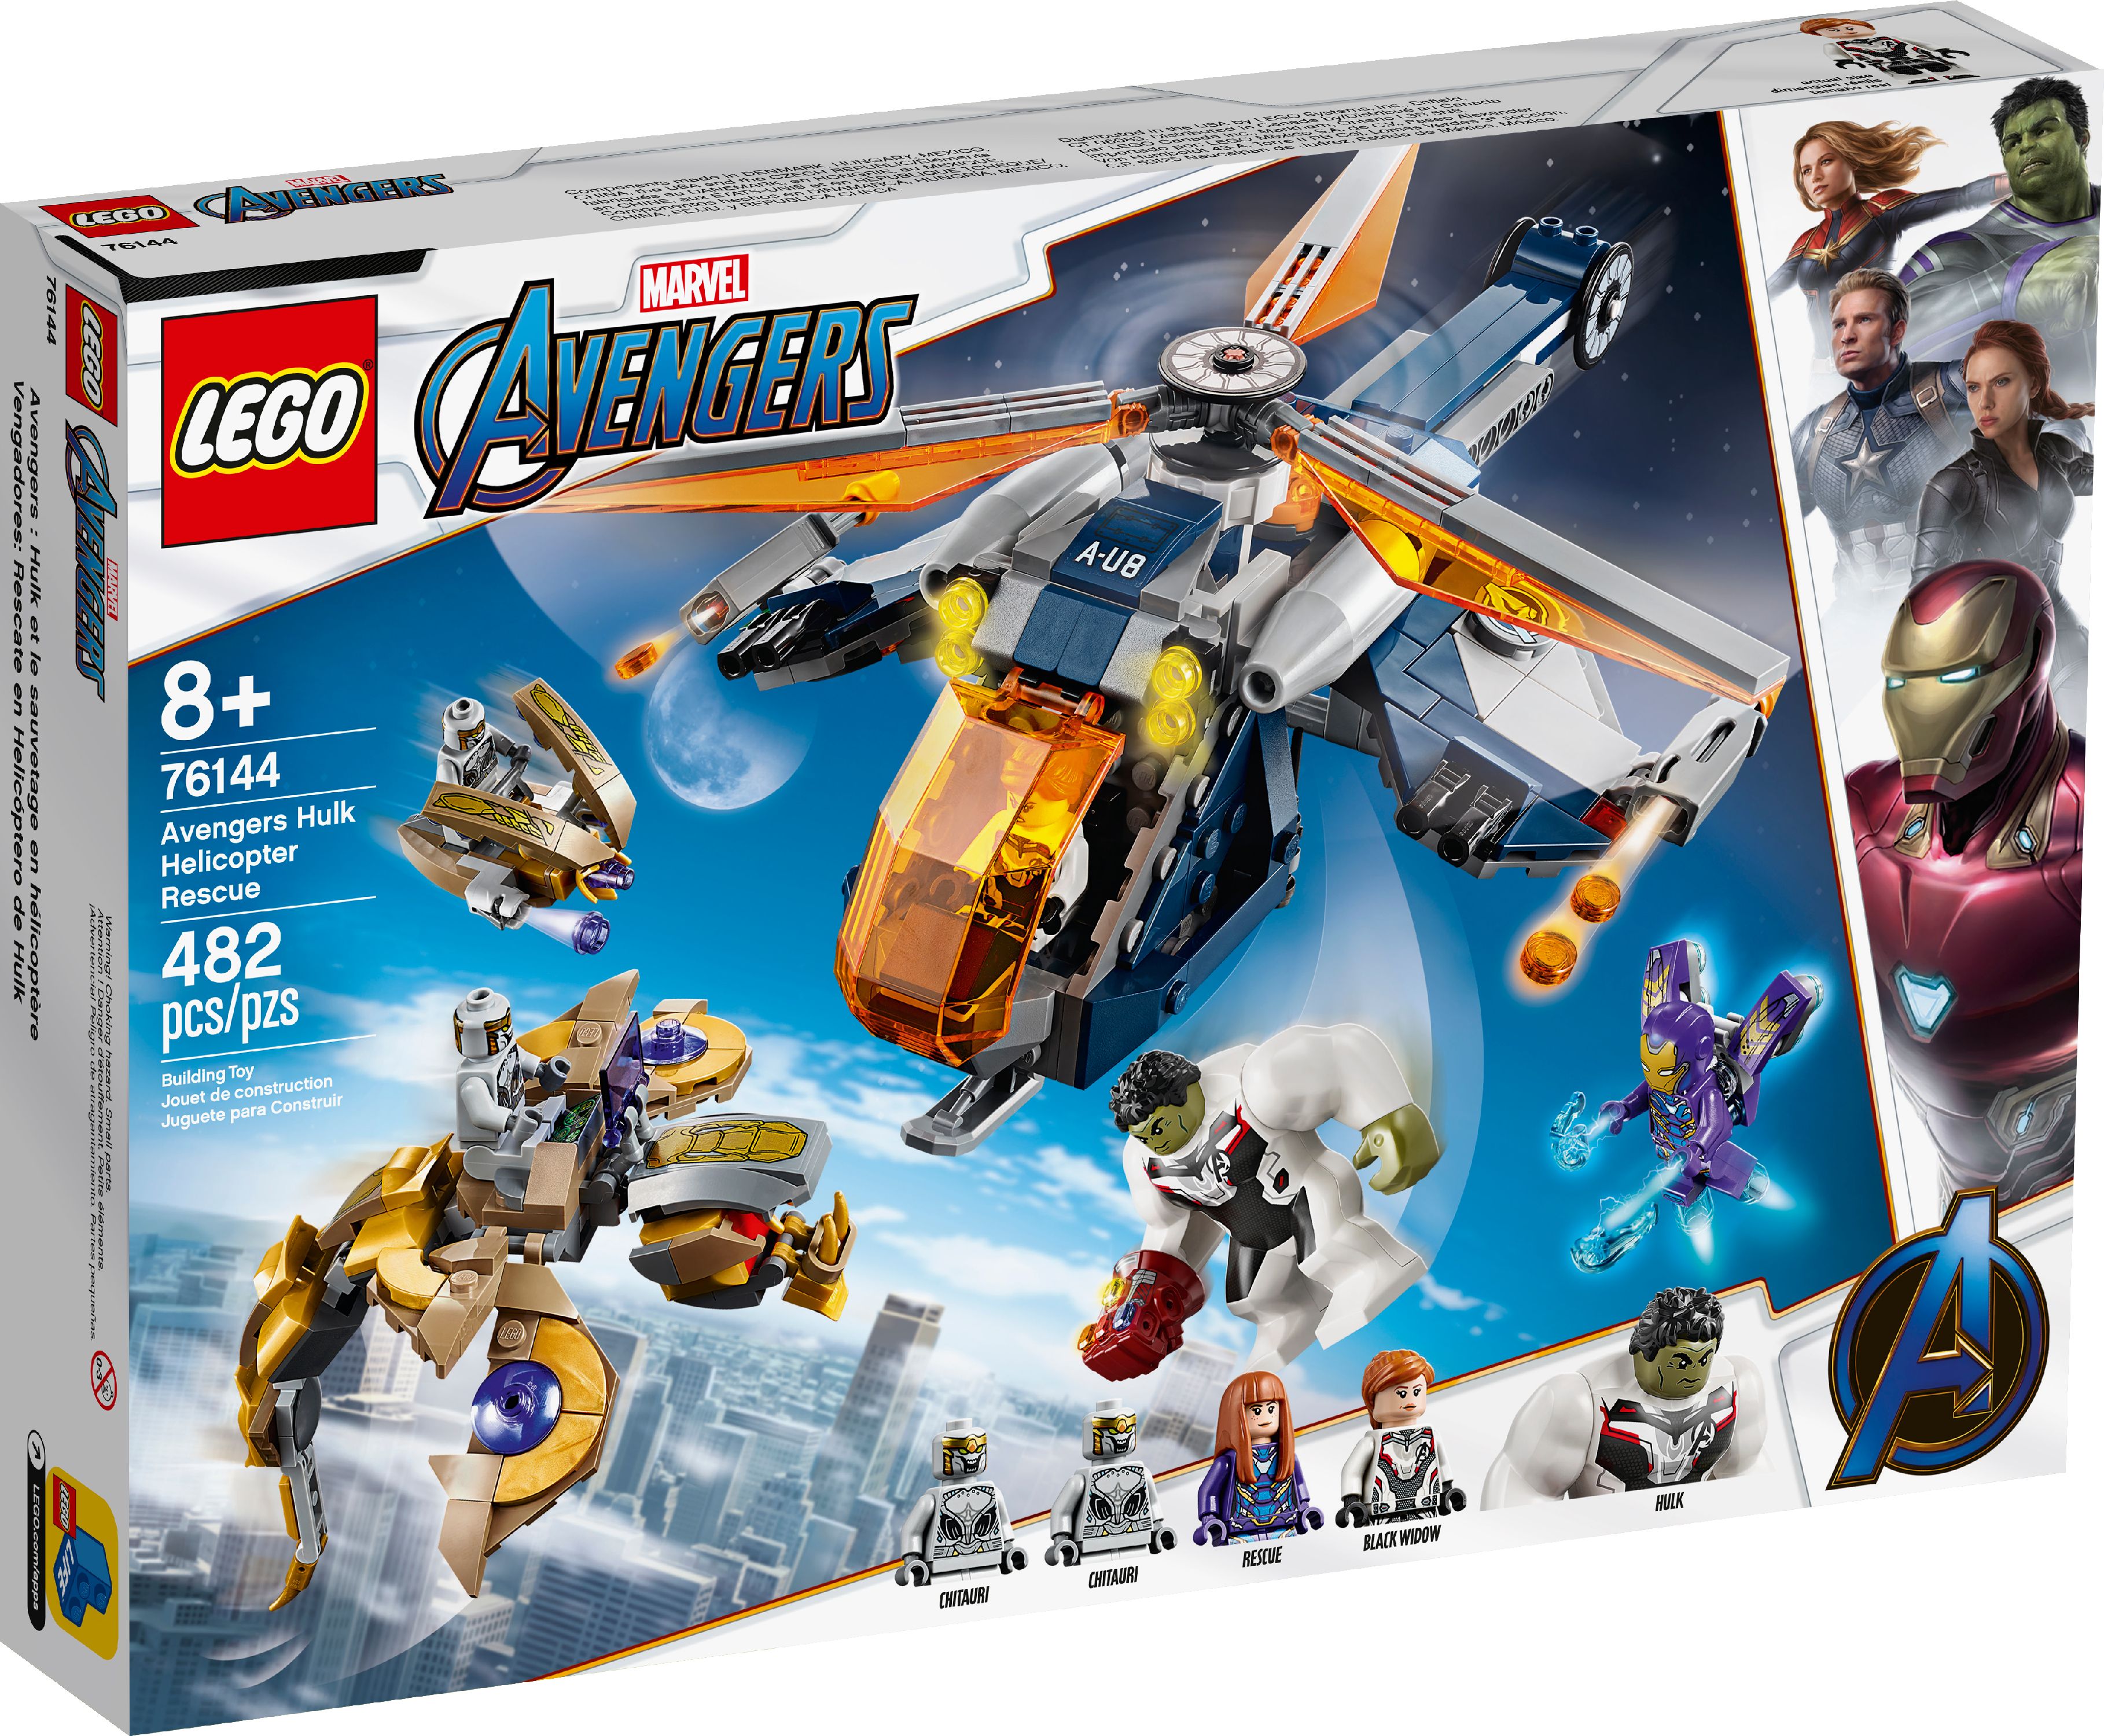 LEGO Super Heroes Avengers Hulk Helicopter Rescue 76144 - image 4 of 7